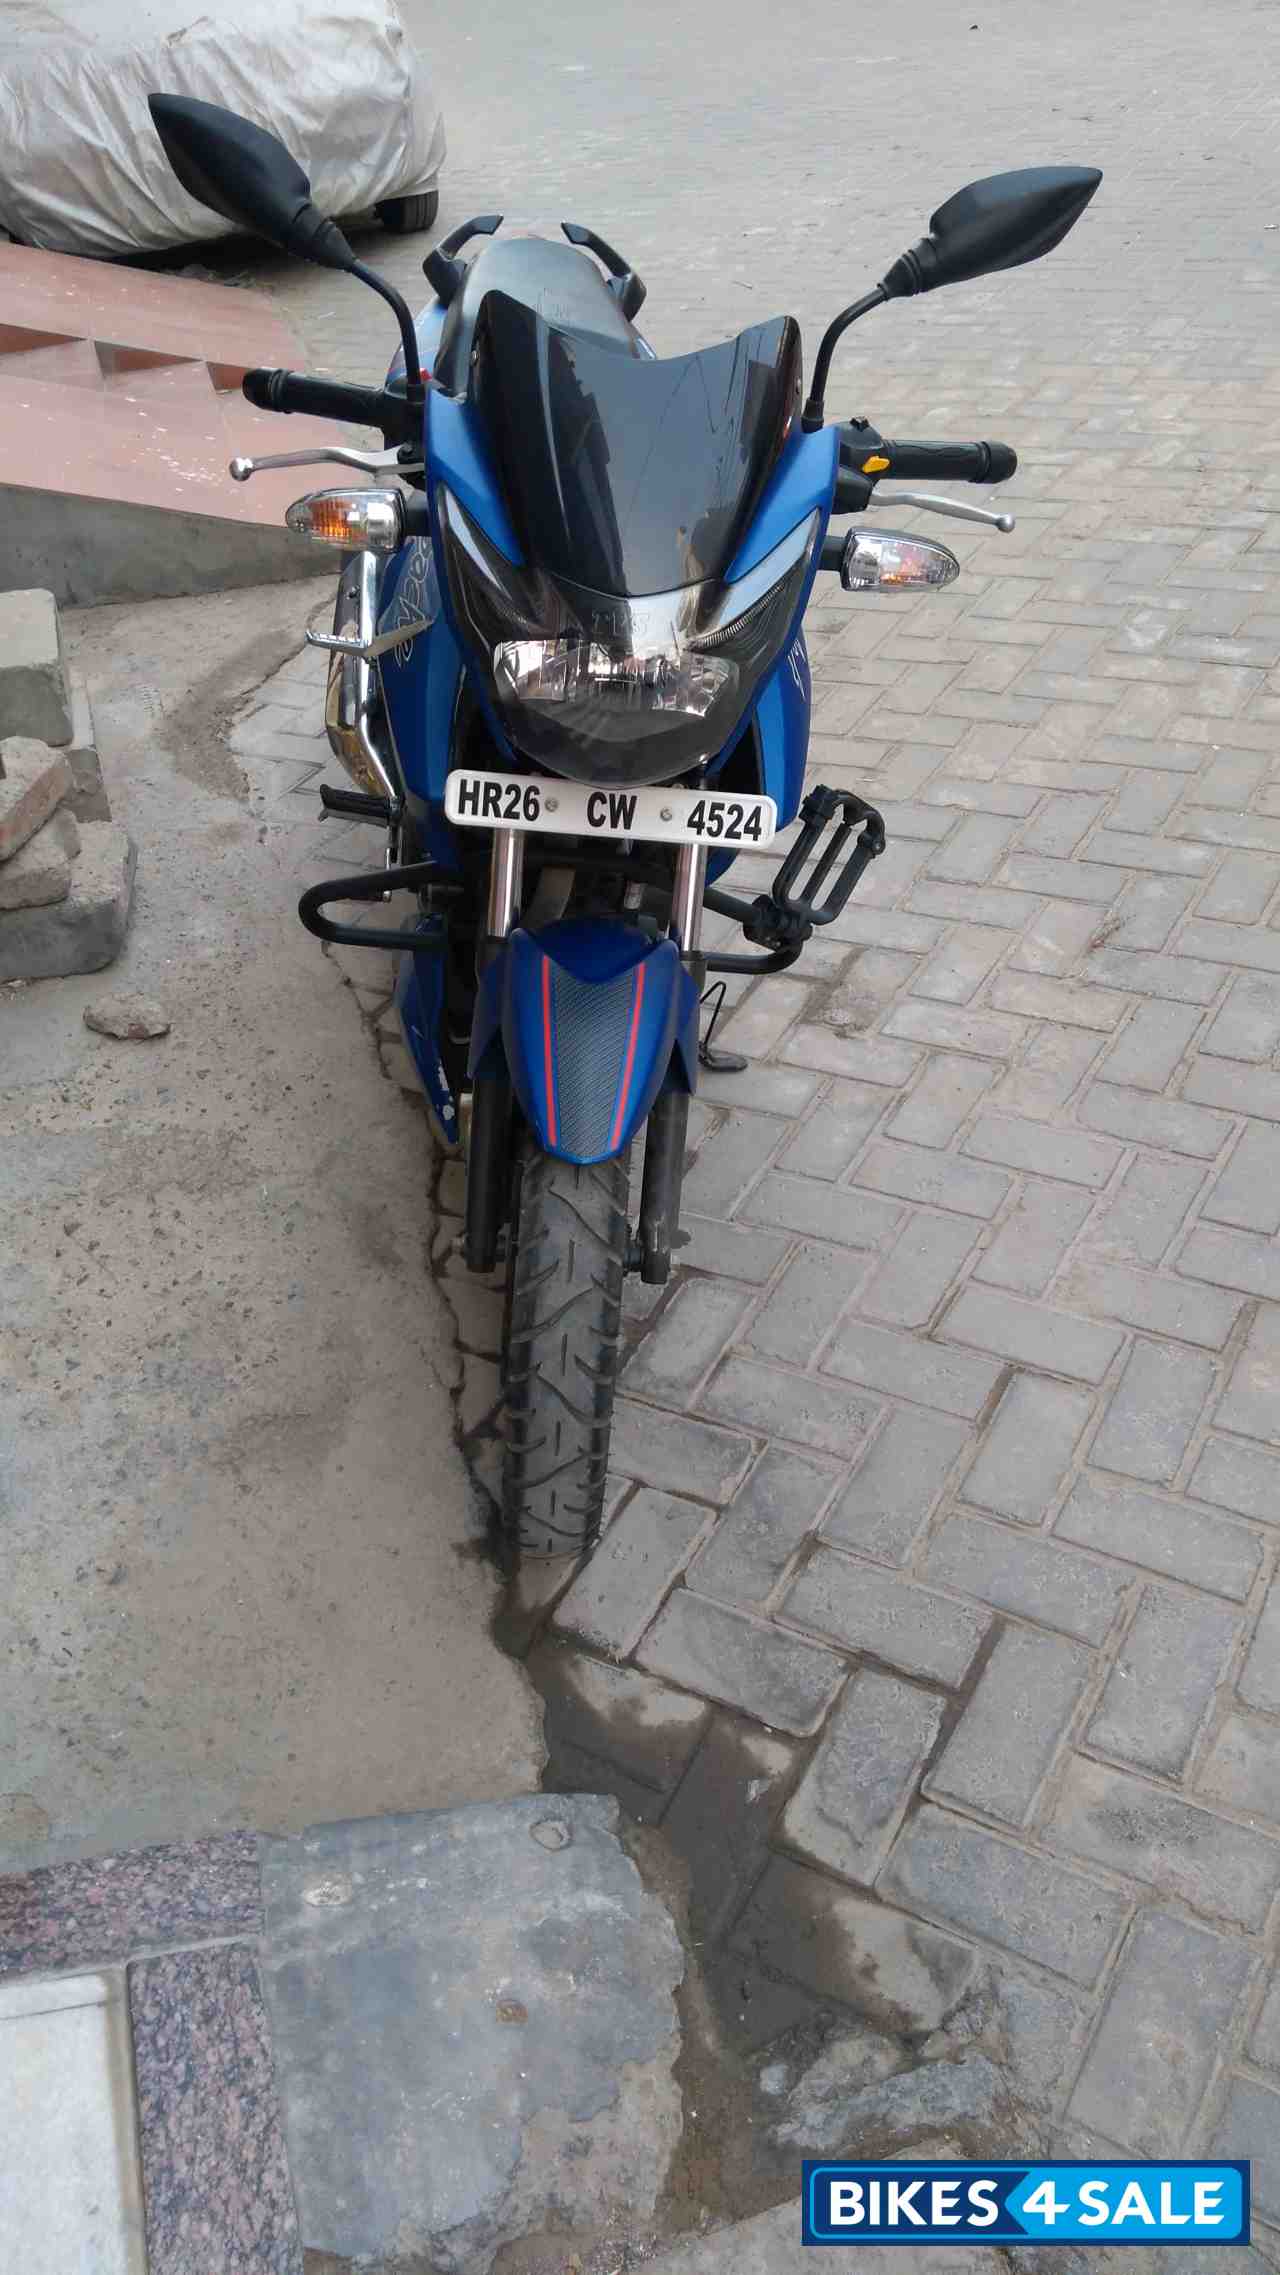 Used 16 Model Tvs Apache Rtr 160 For Sale In Gurgaon Id Matte Blue Colour Bikes4sale